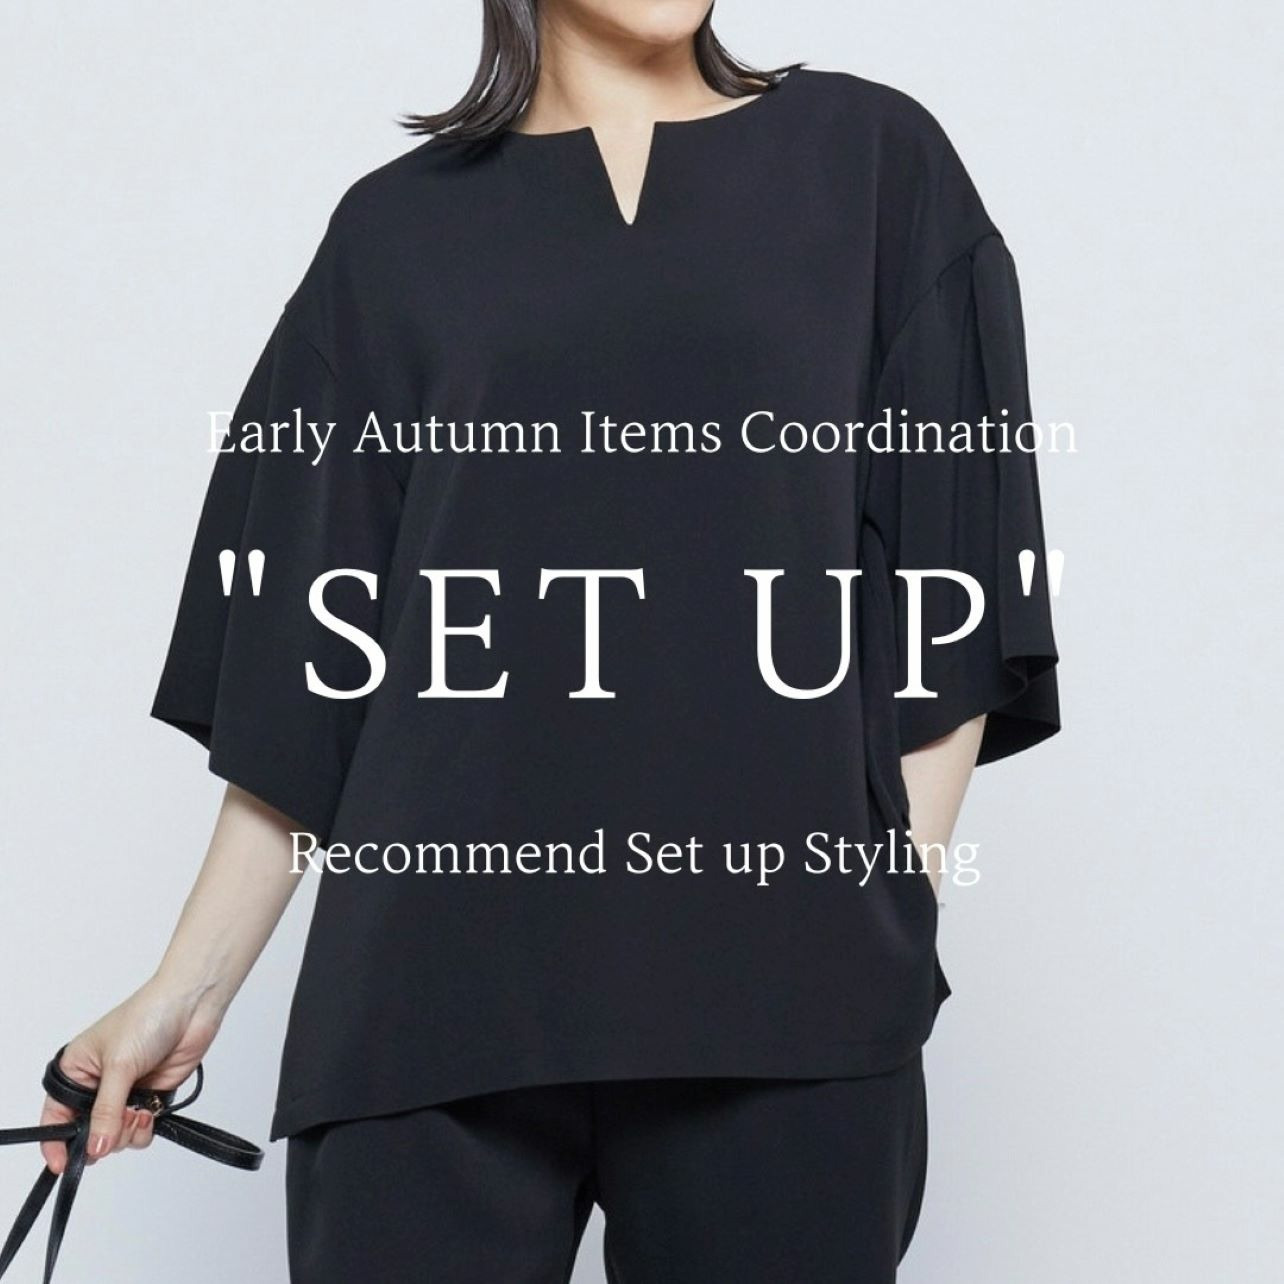 Recommend Styling of August Vol.3 "SET UP"